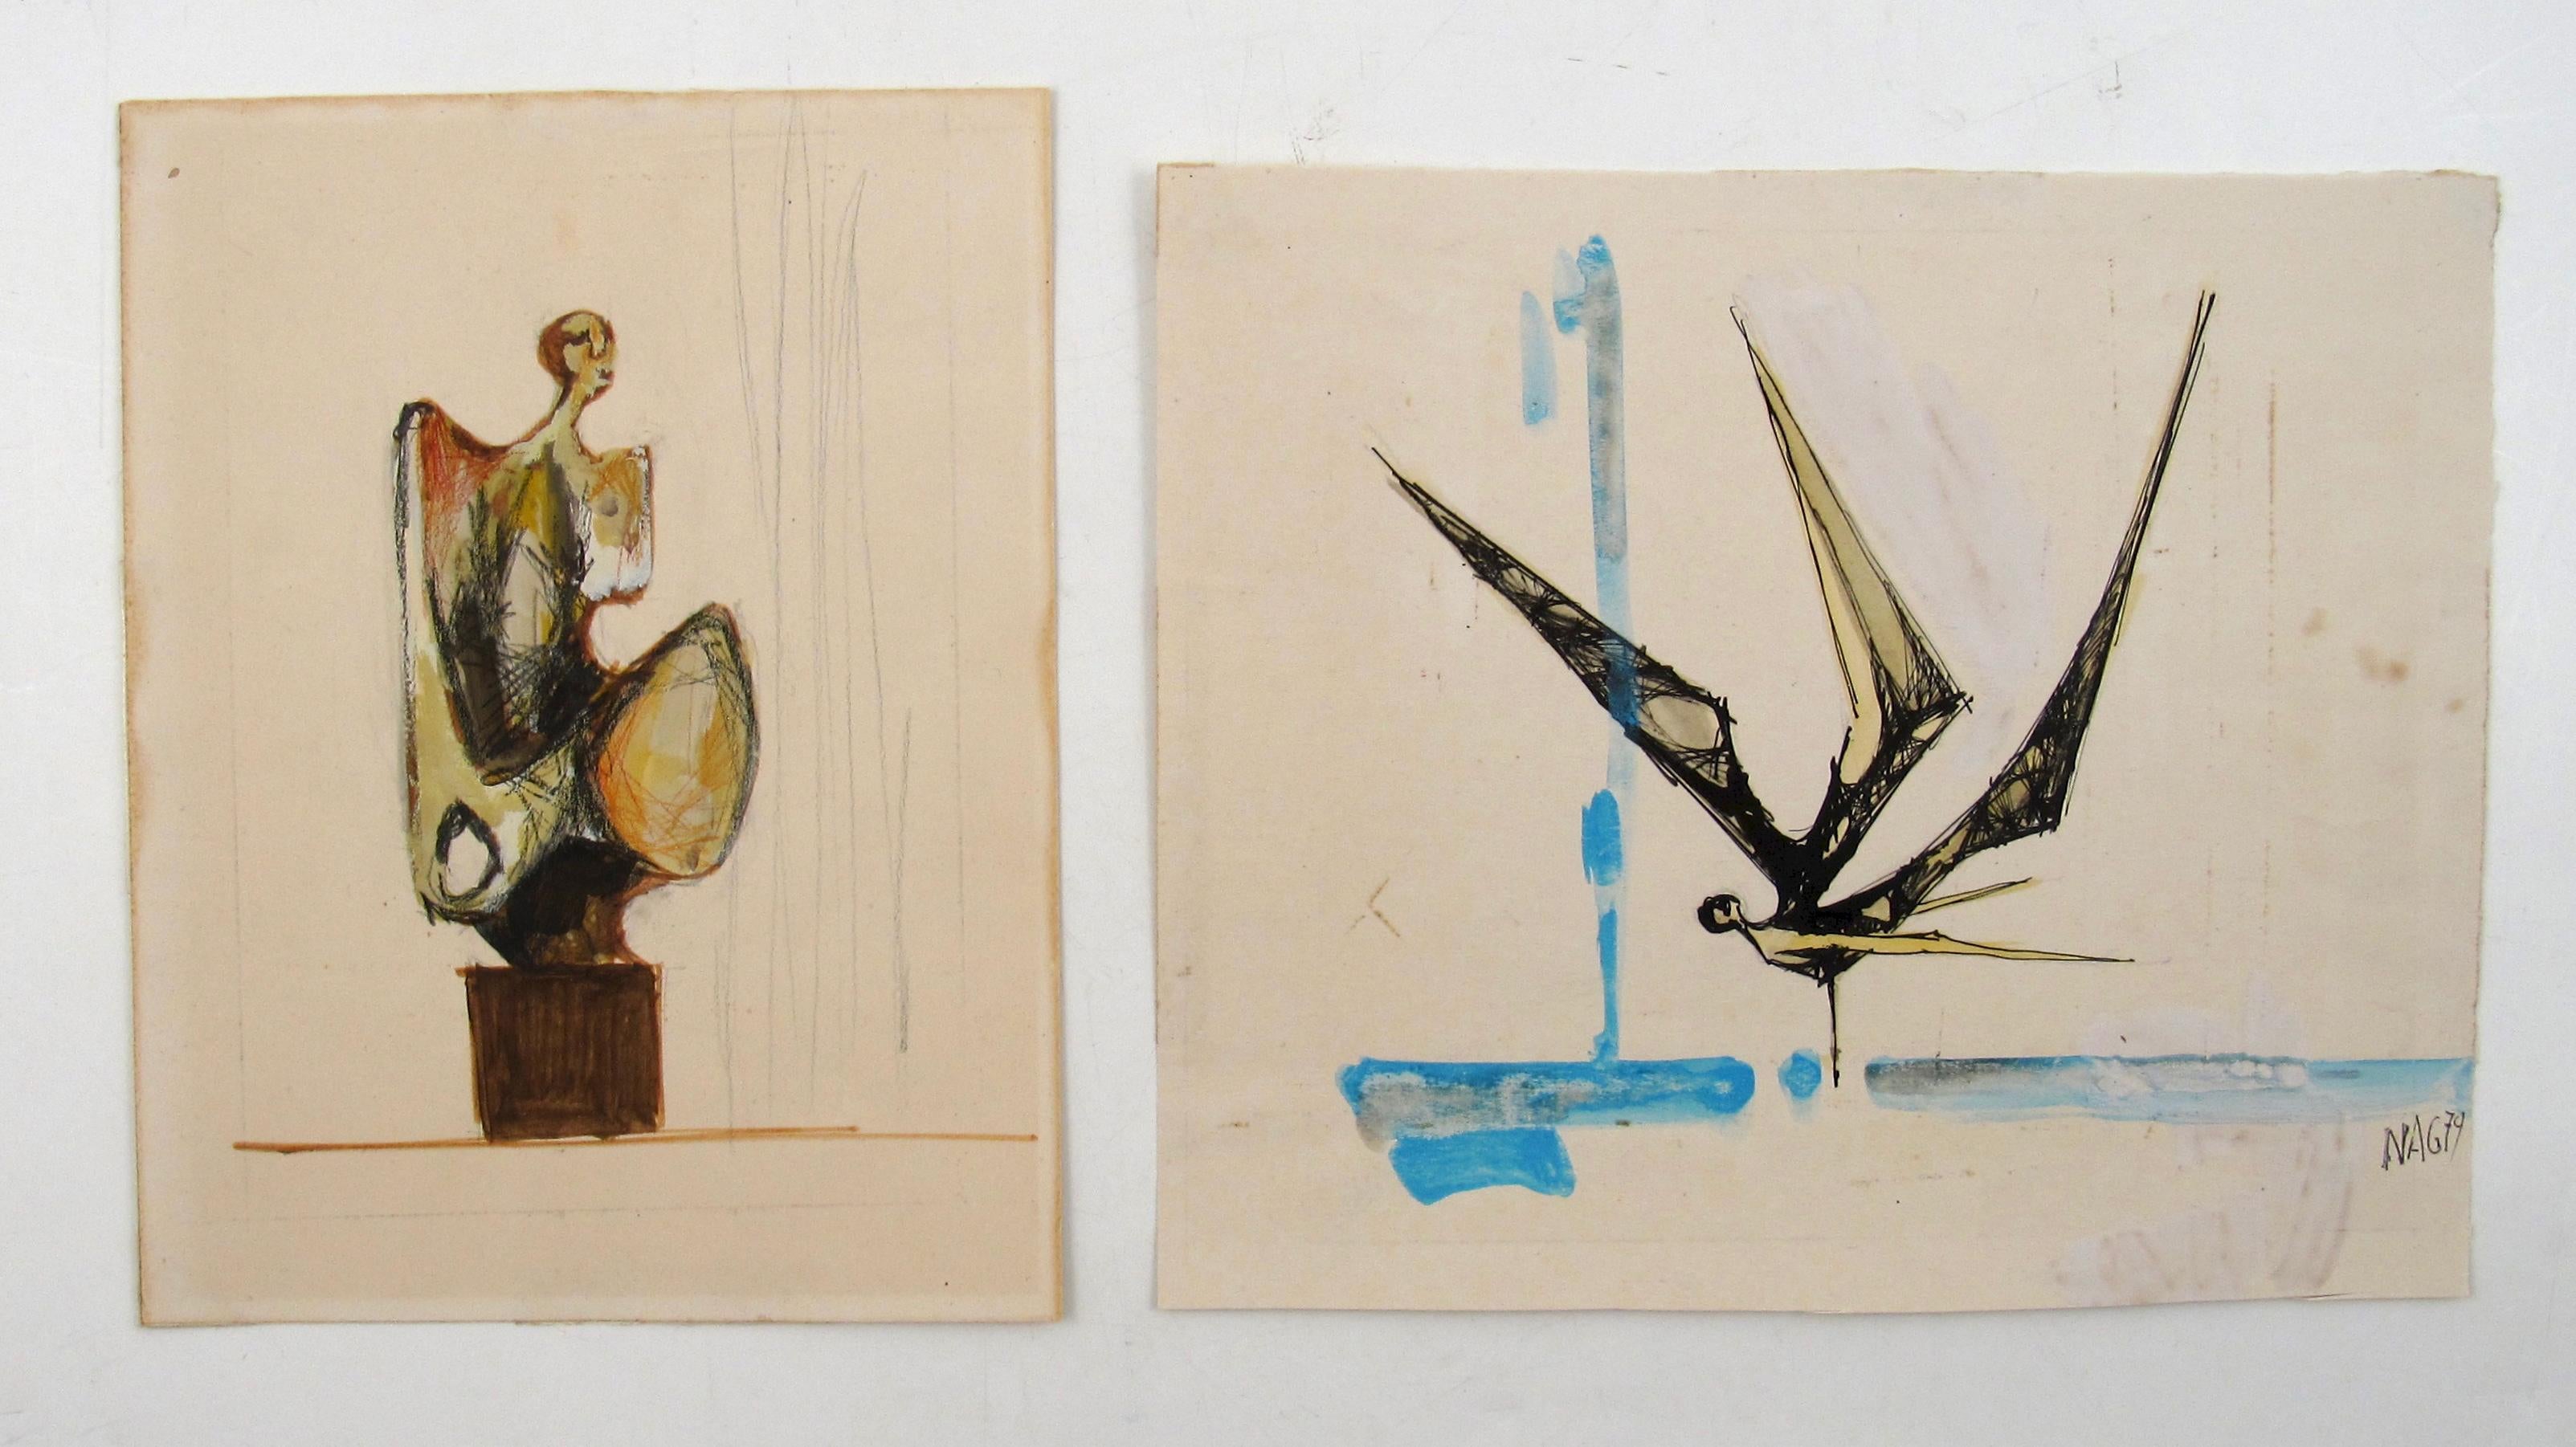 Falling Icarus and Crouching Angel - Two Drawings by Nag Arnoldi, Switzerland